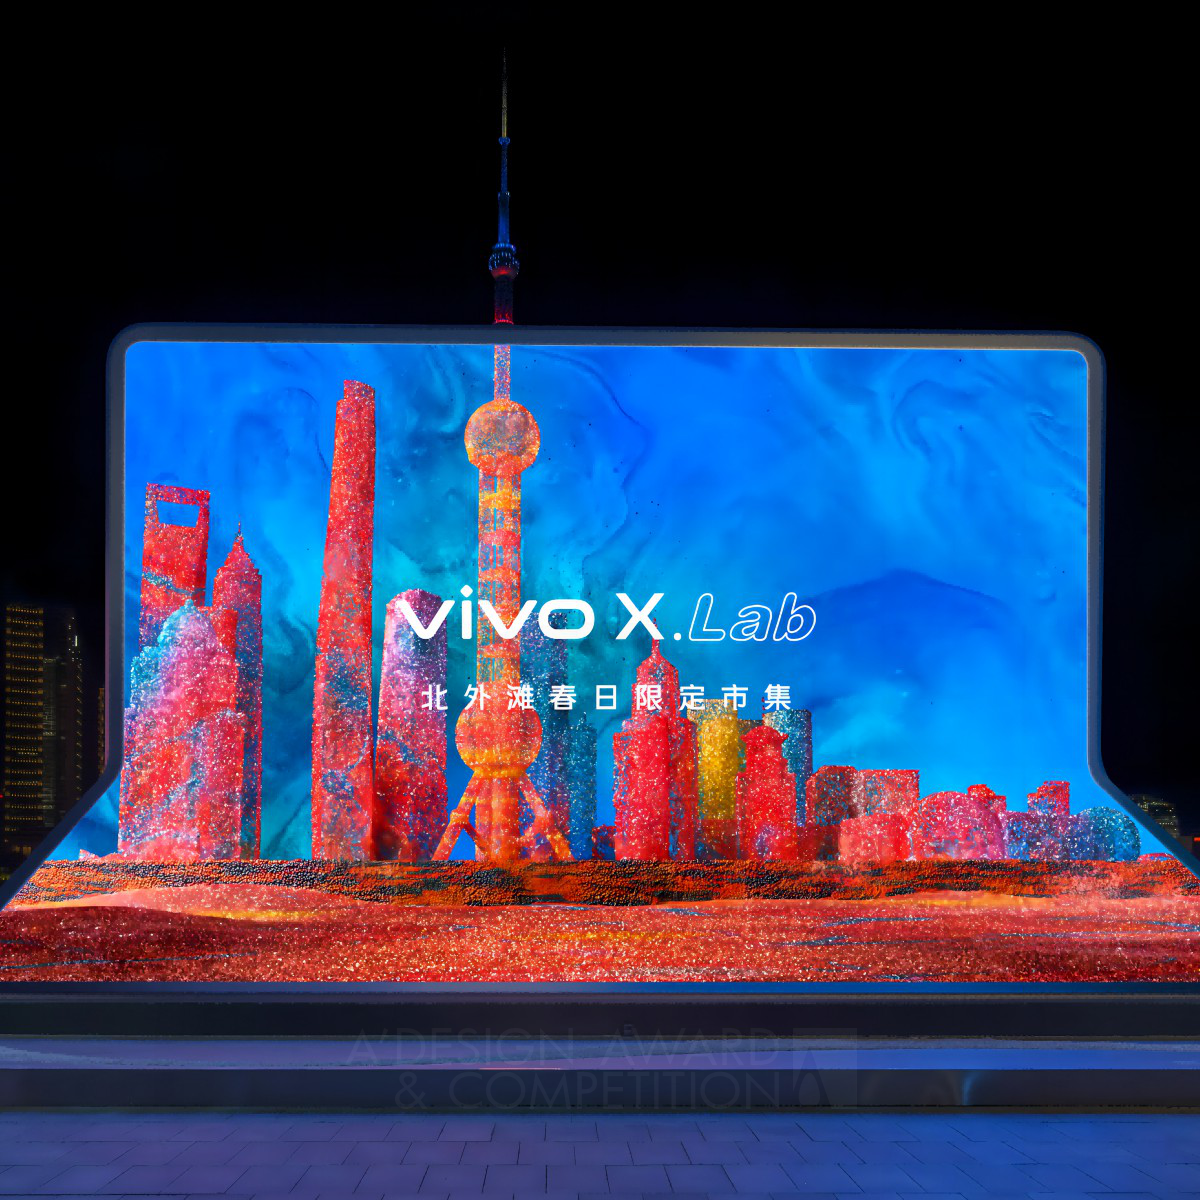 Vivo X Series Outdoor Campaign by OUTPUT